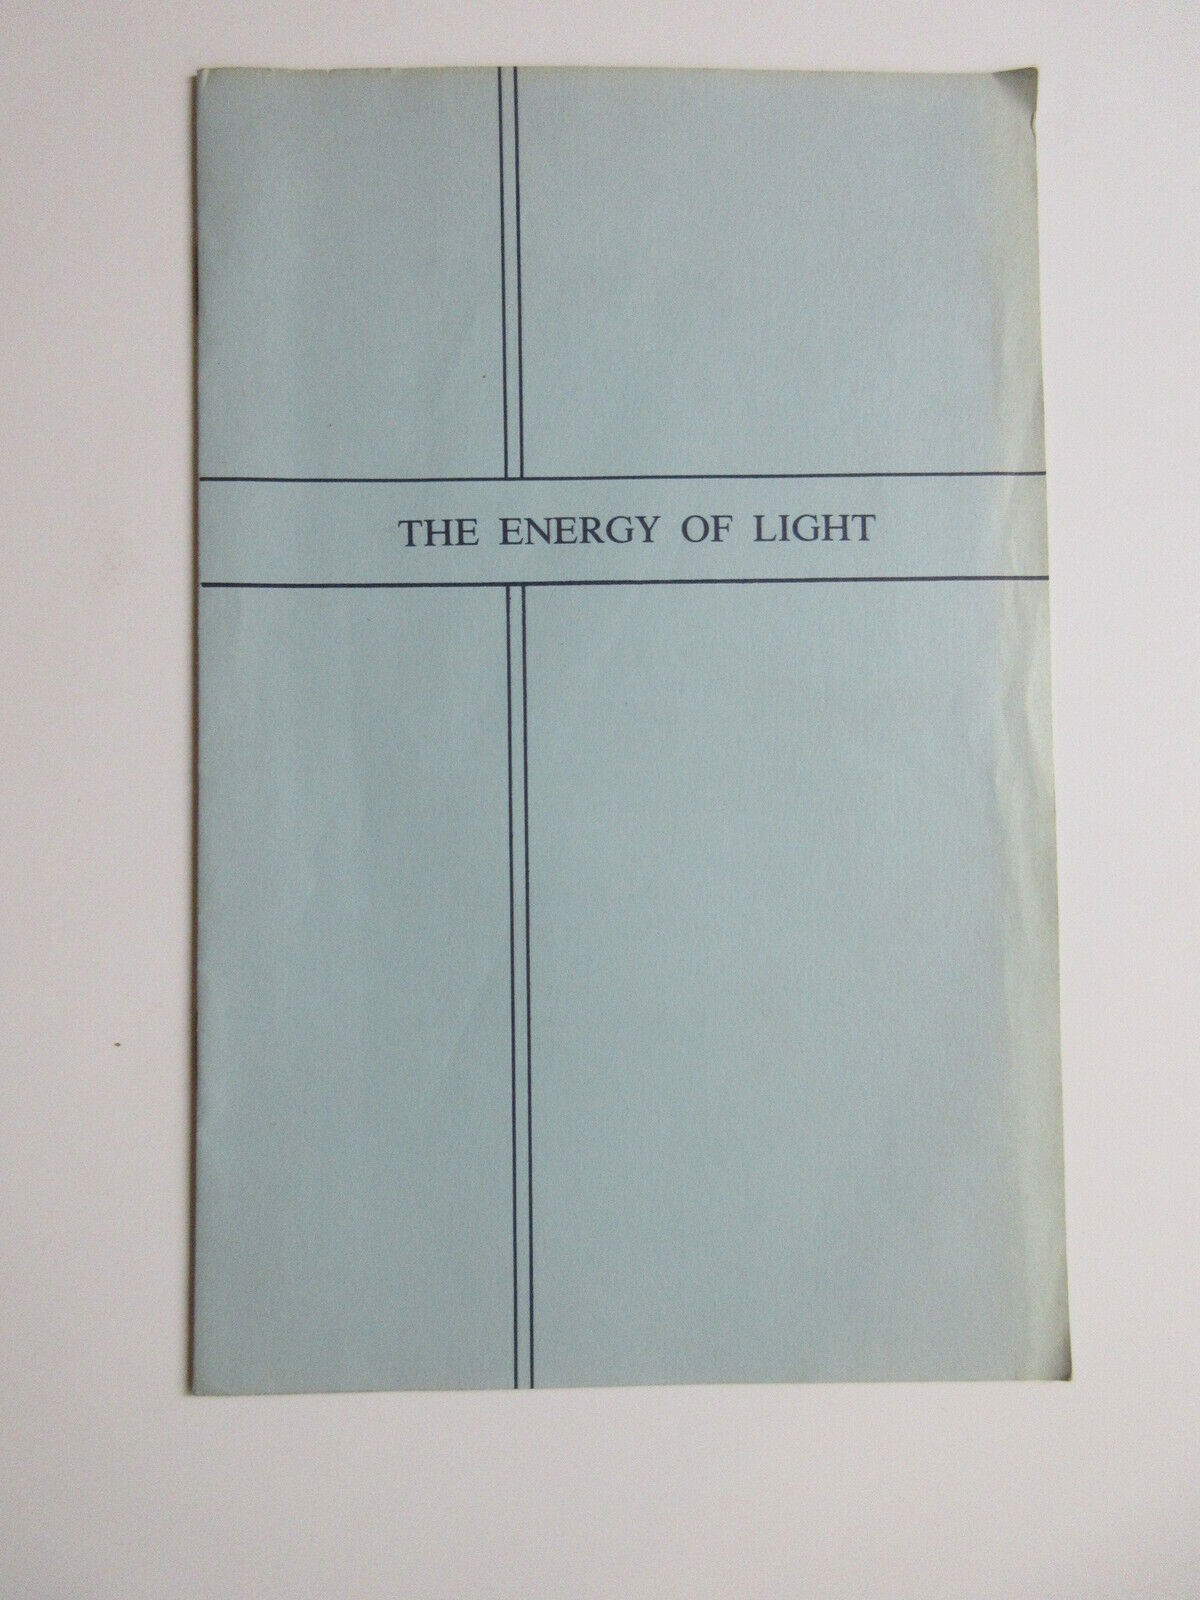 THE ENERGY OF LIGHT booklet Published by TRIANGLES